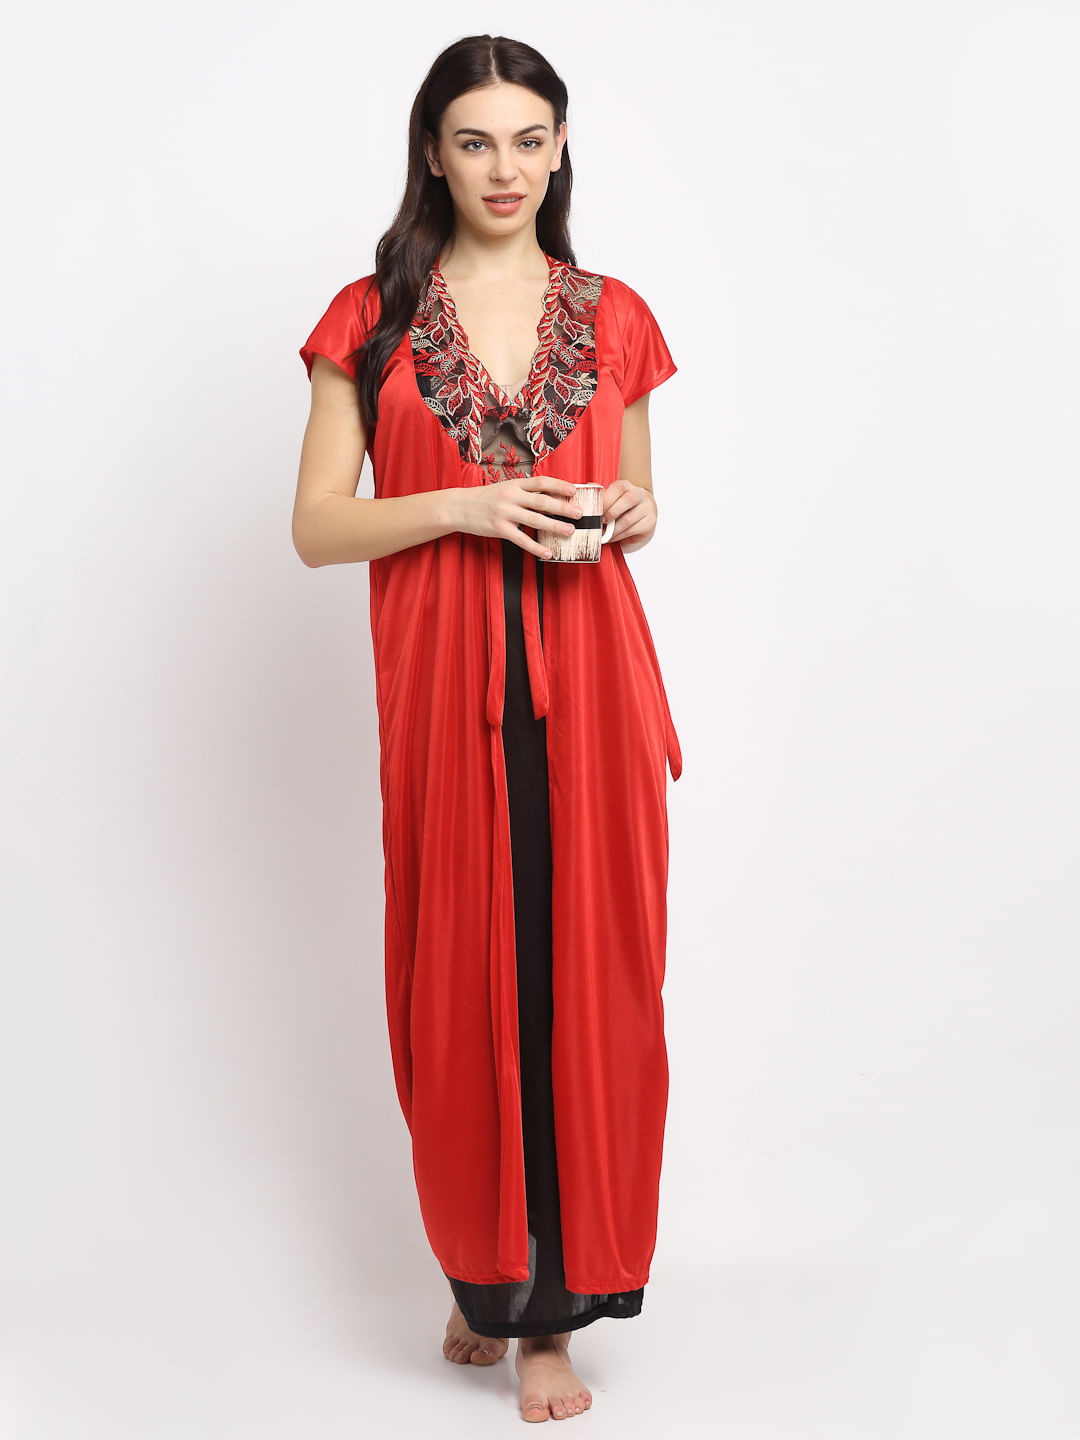 Black Solid Satin Nighty with Red Robe (Free Size)